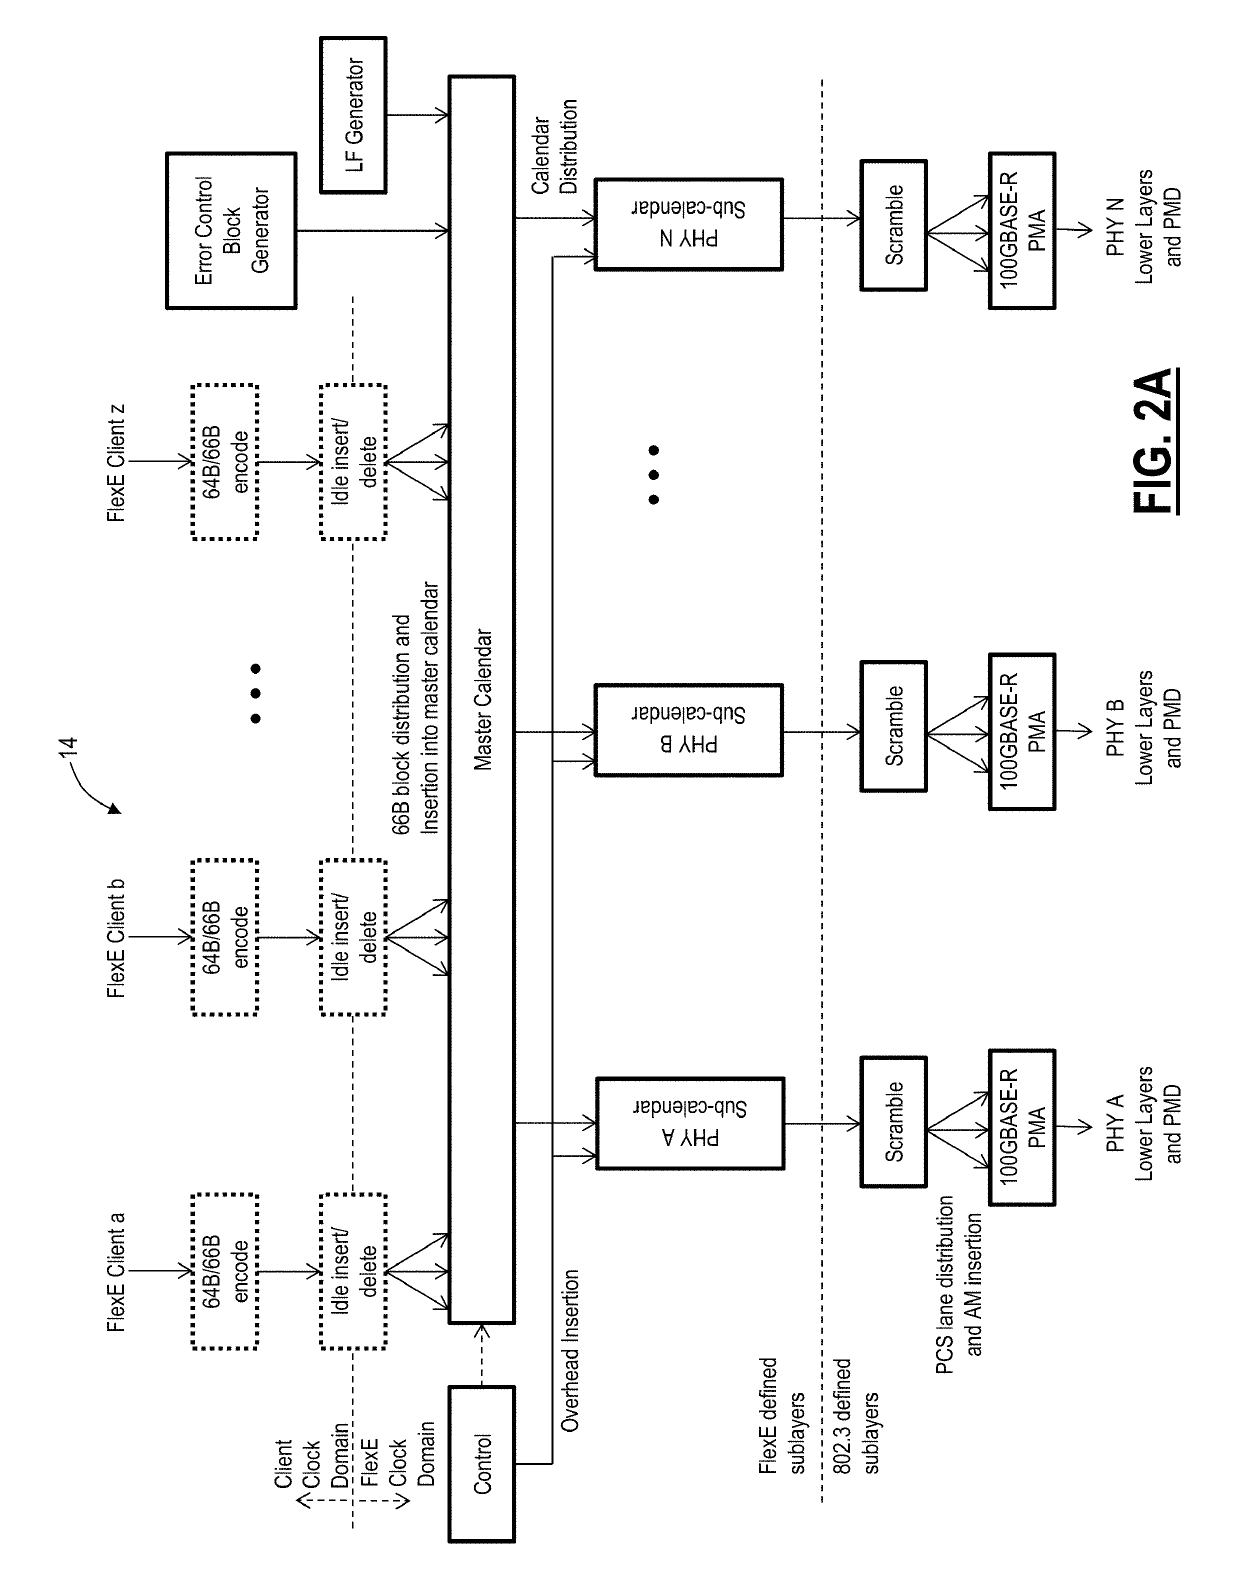 Flexible ethernet encryption systems and methods